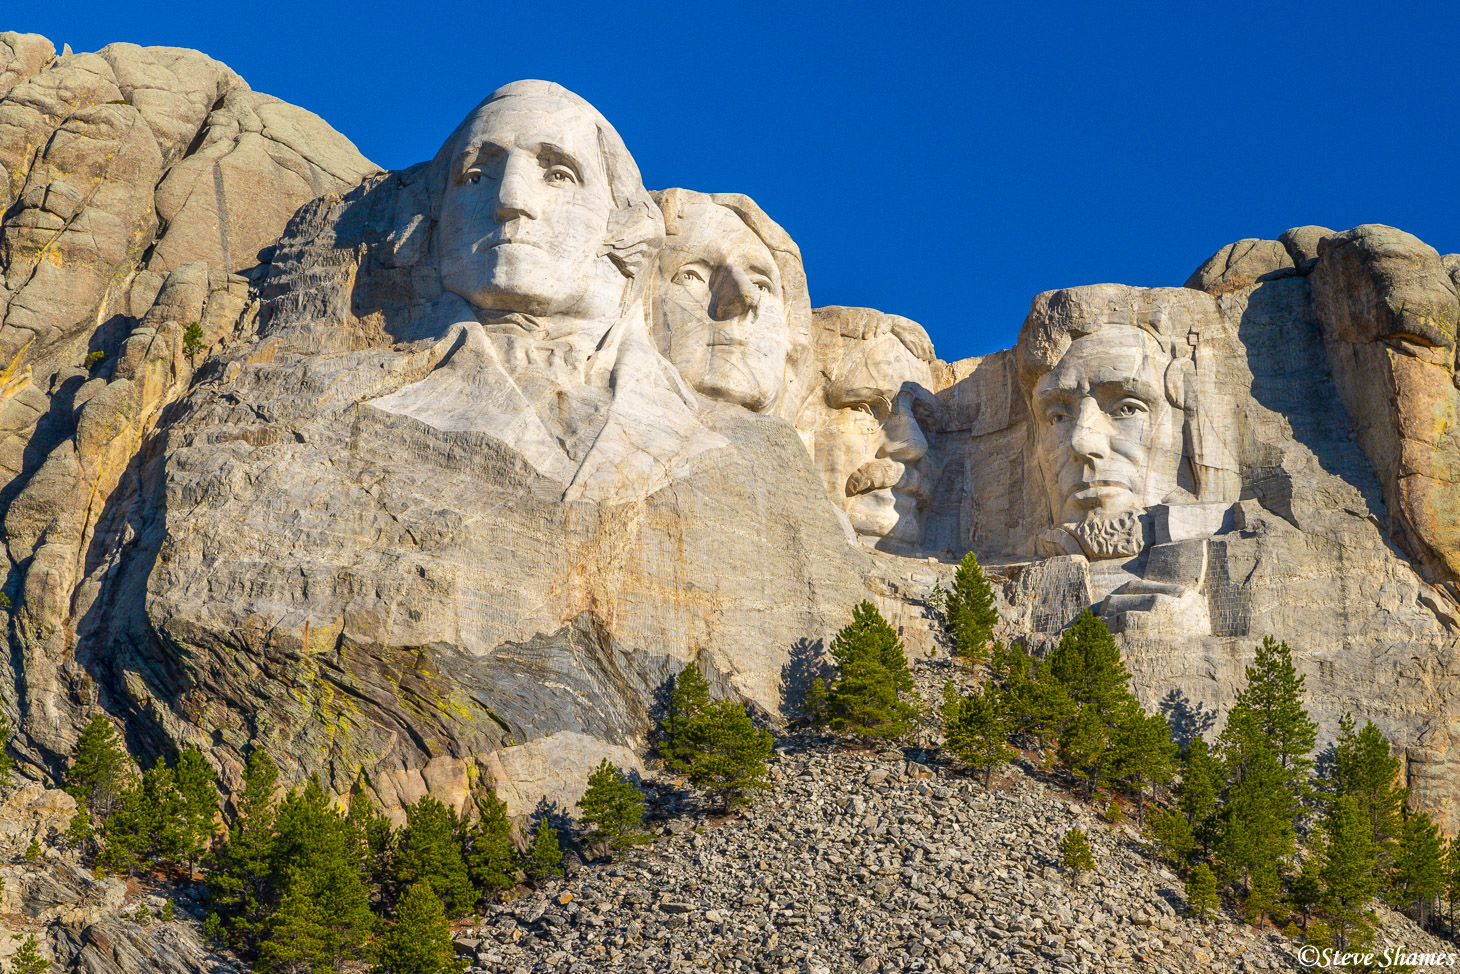 Here is the classic view of Mt Rushmore. This is a very impressive sight.